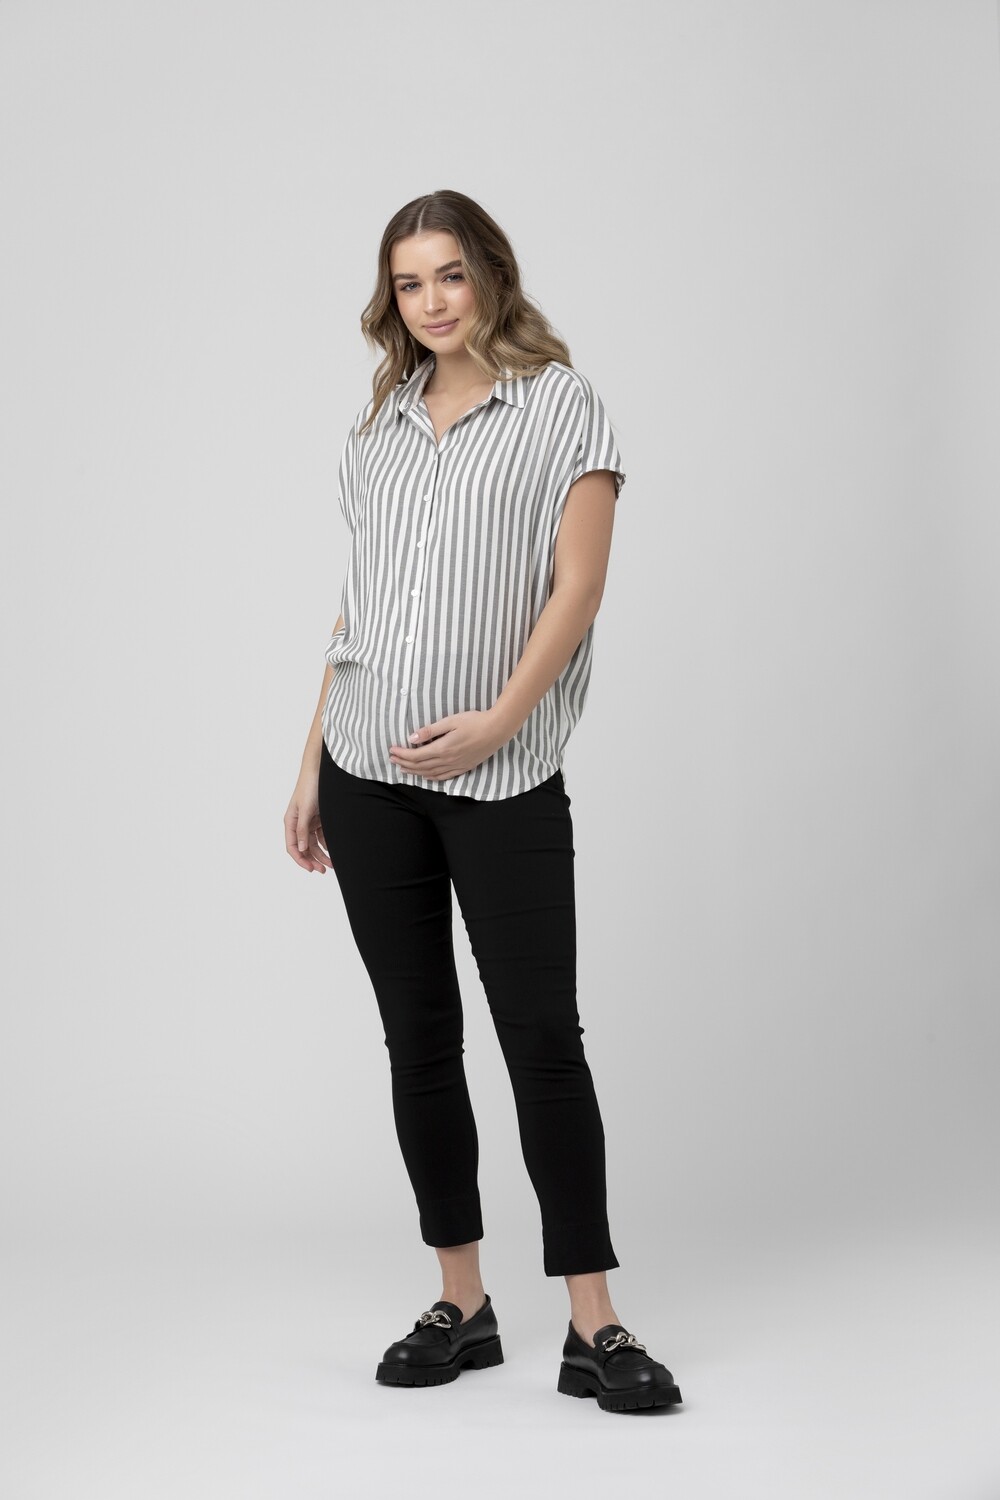 Ada Relaxed Shirt, Color: Black/White, Size: XS